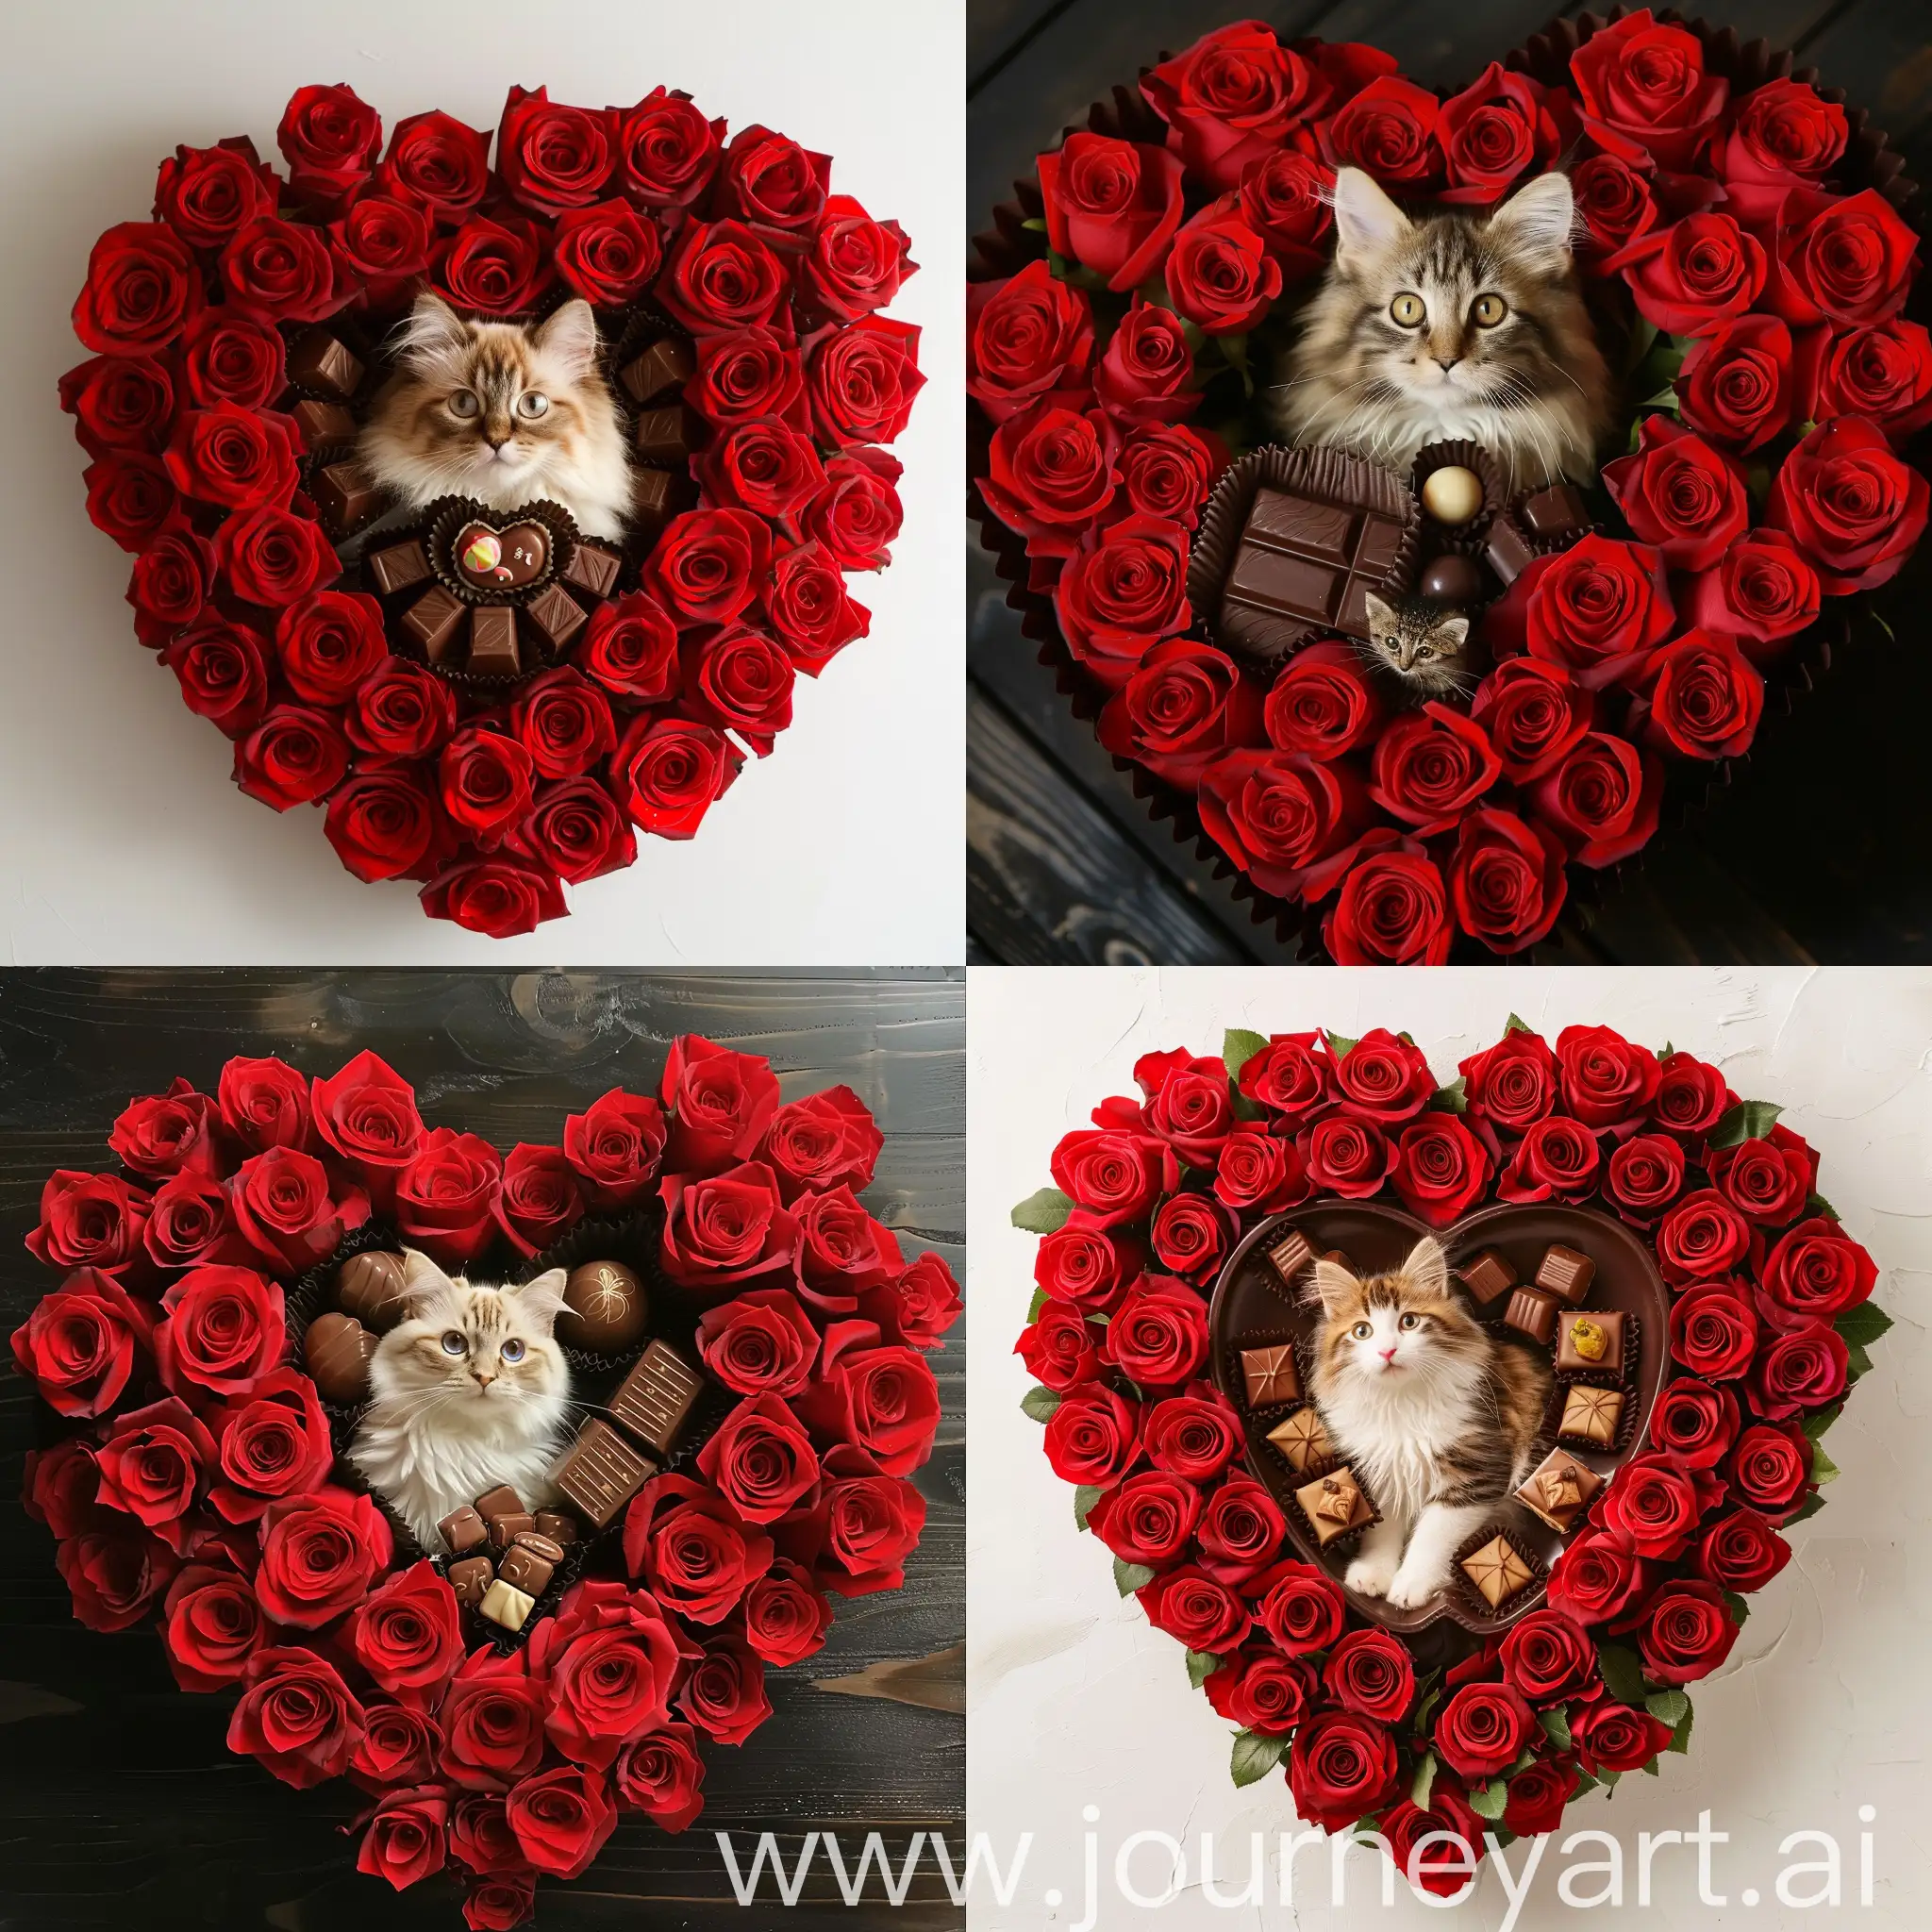 Red roses arranged in a heart shape and a cat in the middle with chocolates.